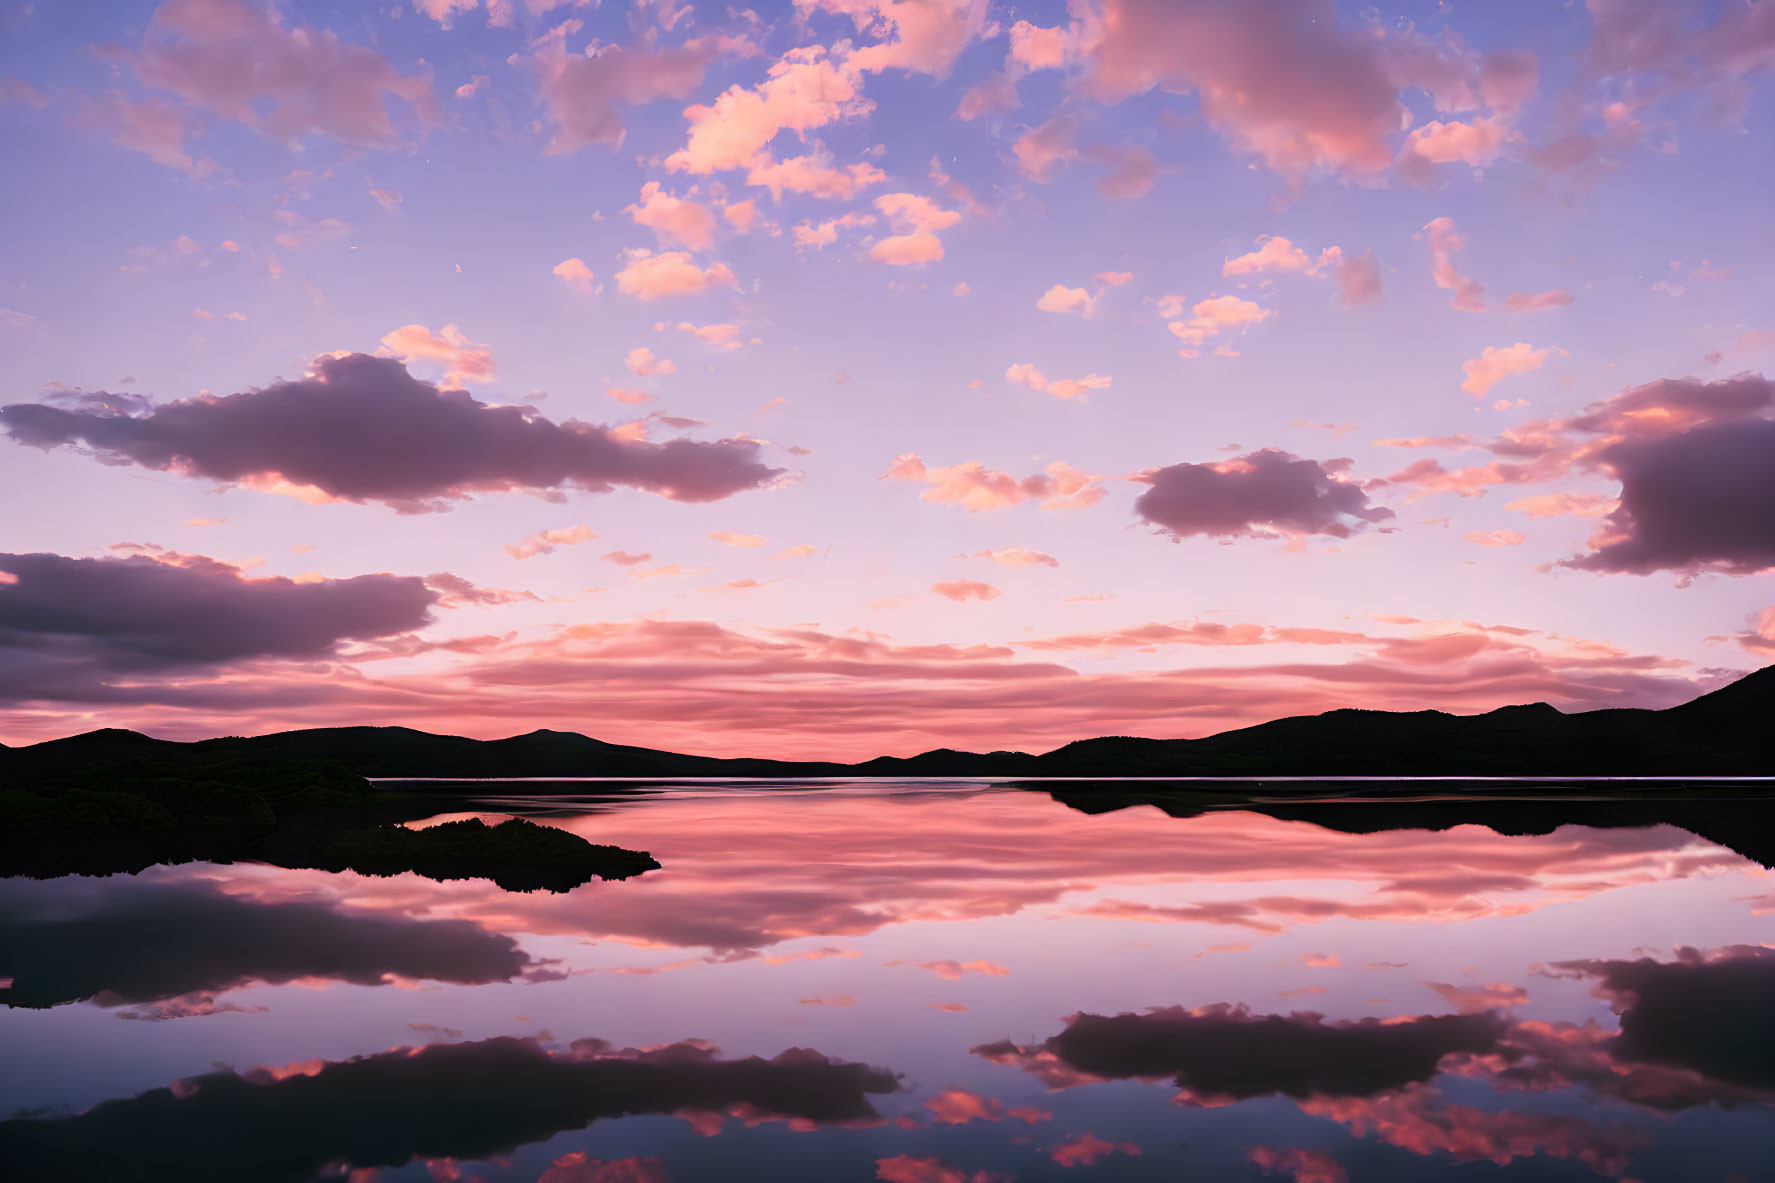 Tranquil twilight scene: pink and purple clouds reflected on serene lake.